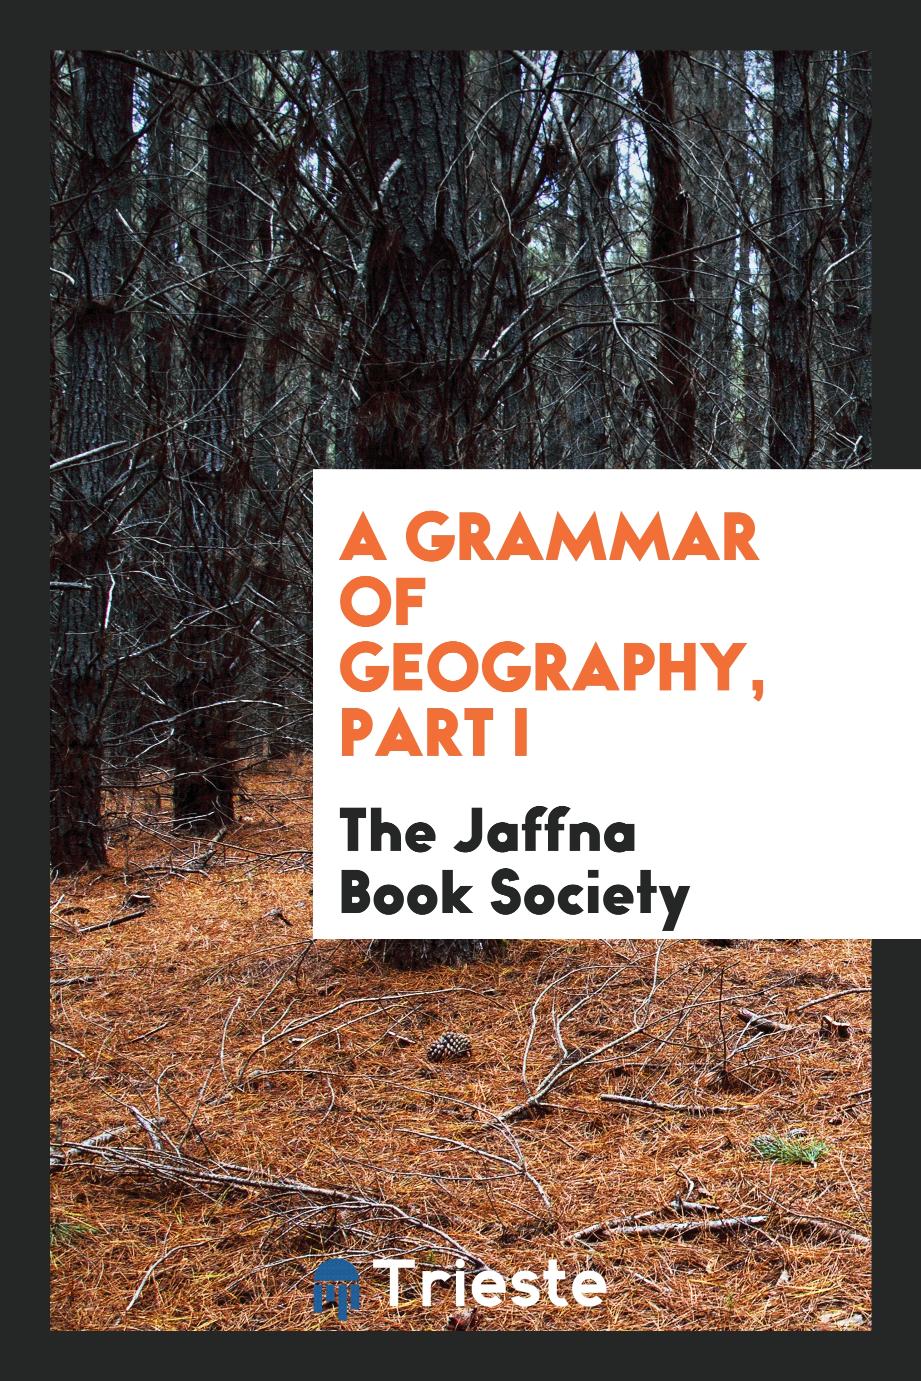 A grammar of geography, part I